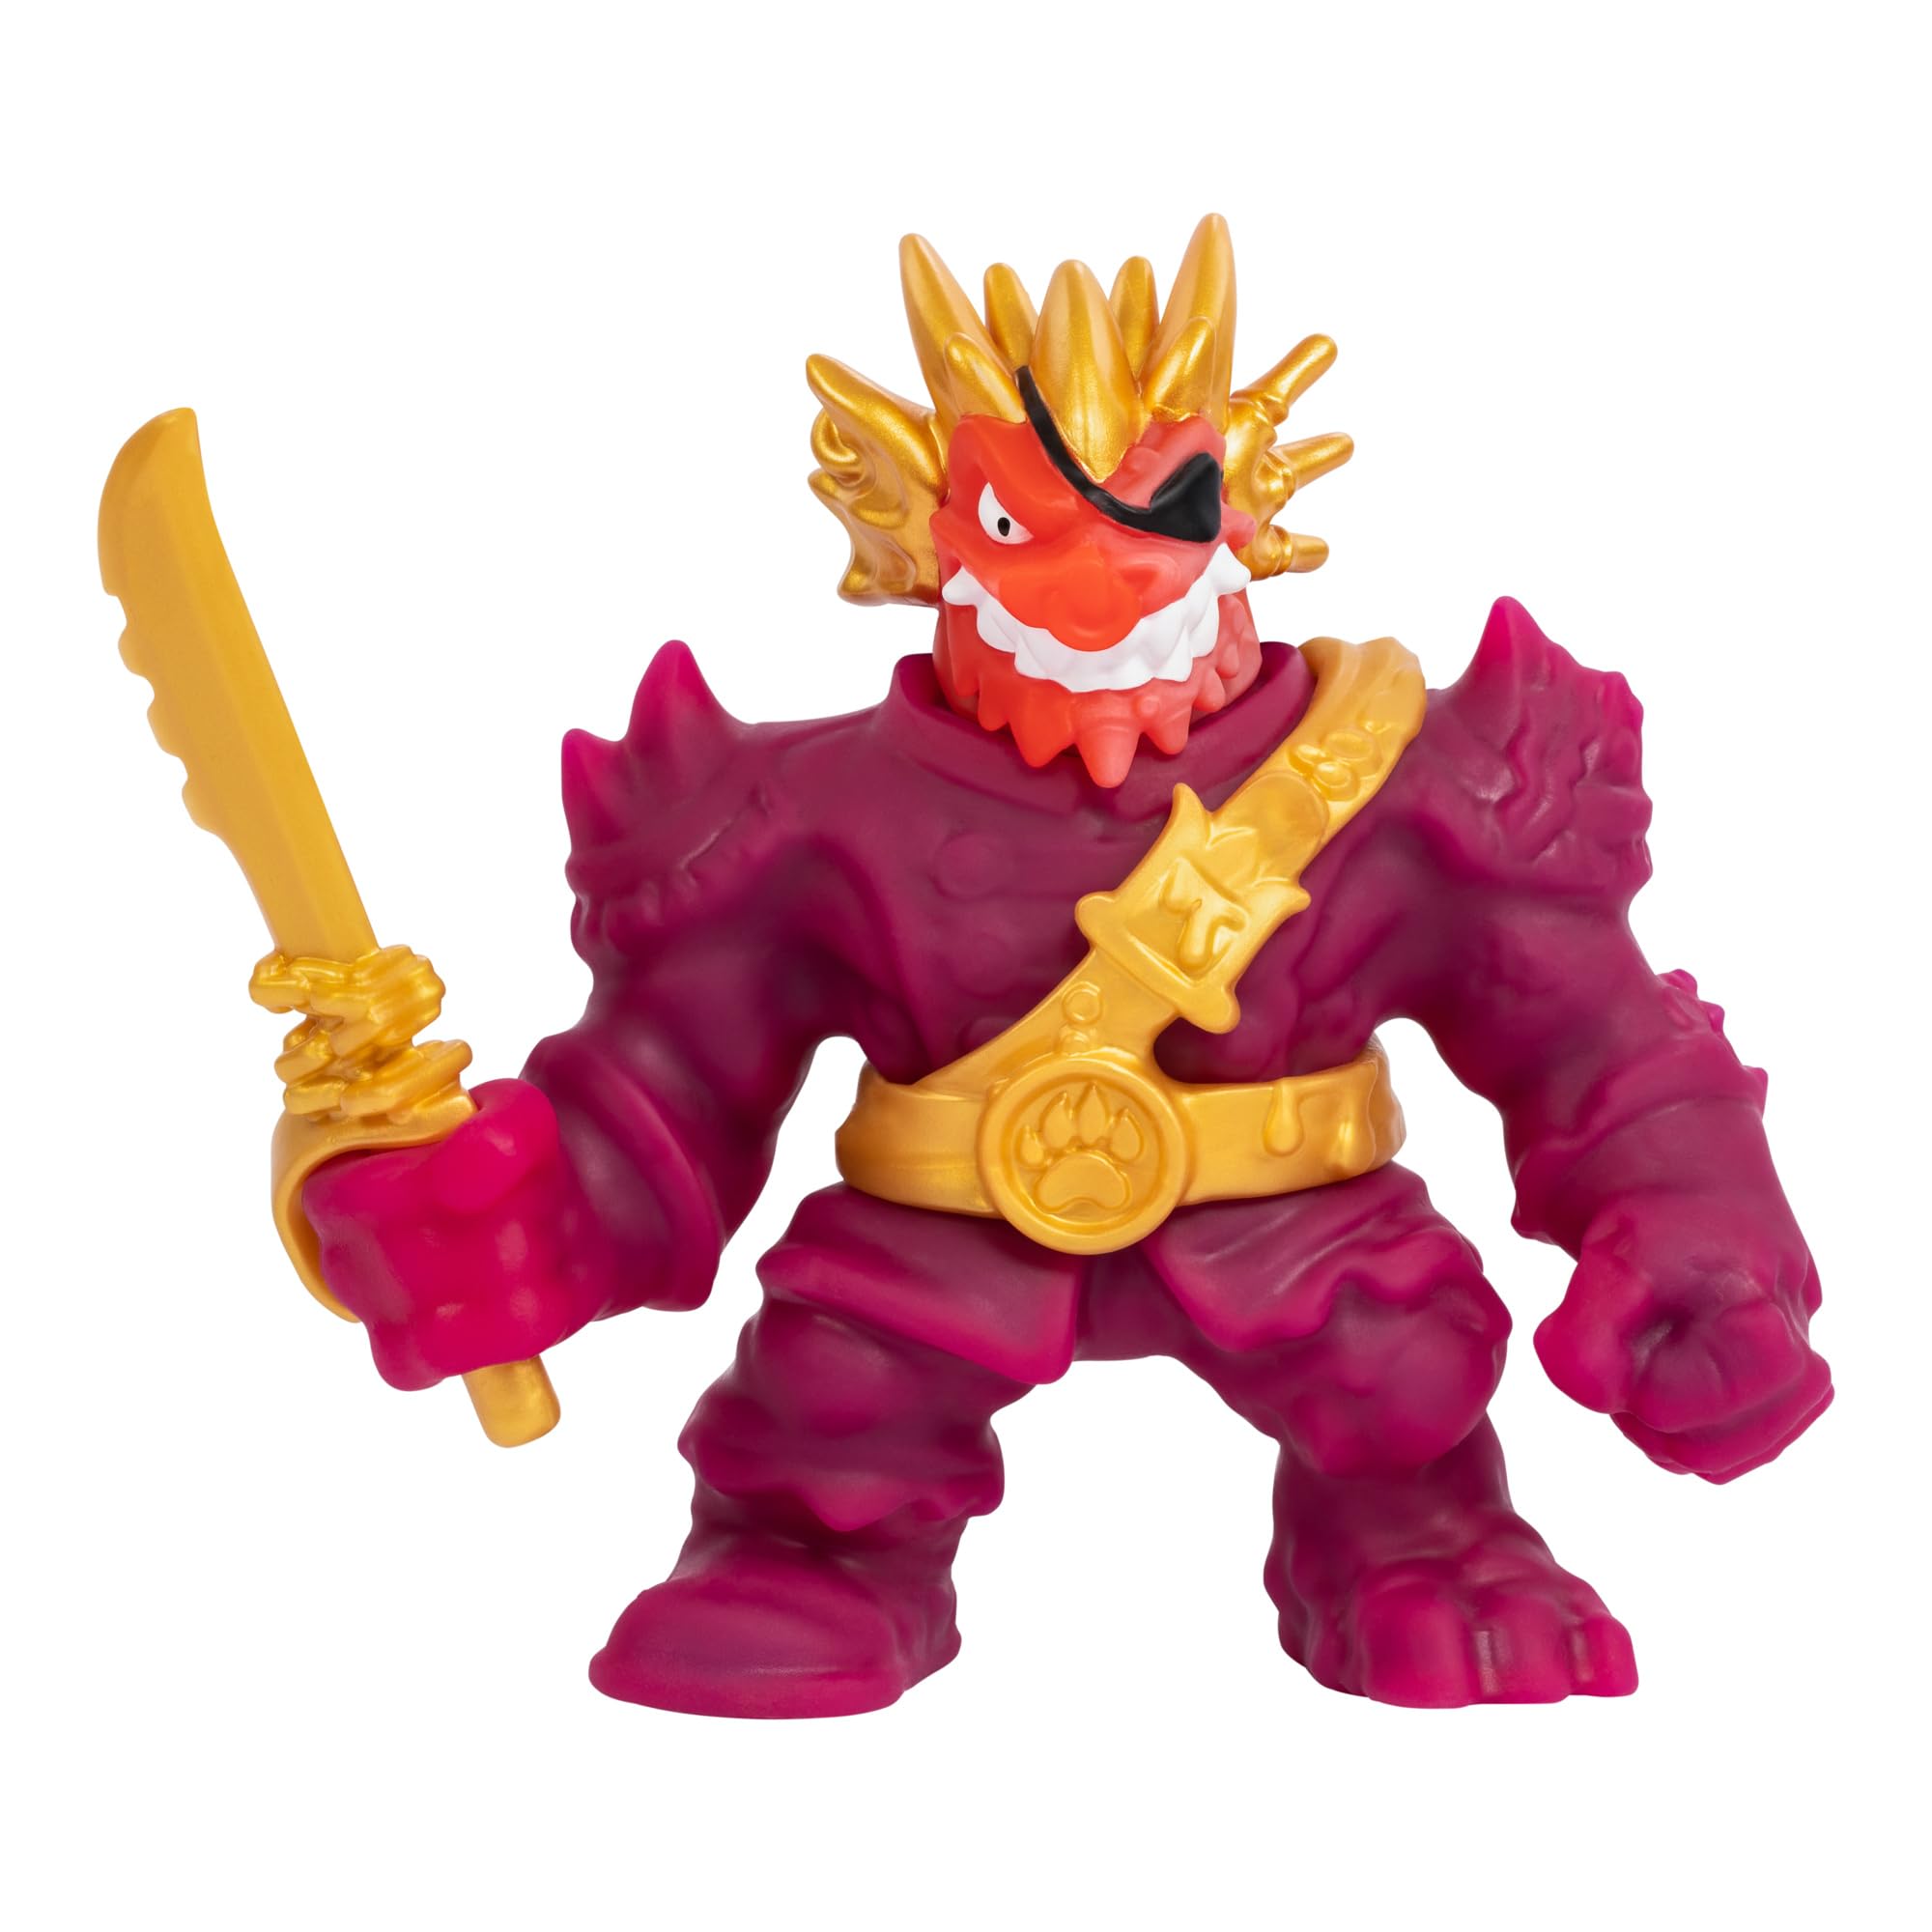 Heroes of Goo Jit Zu Cursed Goo Sea | Super Gooey, Goo Filled Toy Blazagon Action Figure Hero Pack | with Color Changing Face That Reveals His Curse | Stretch Him 3 Times His Size